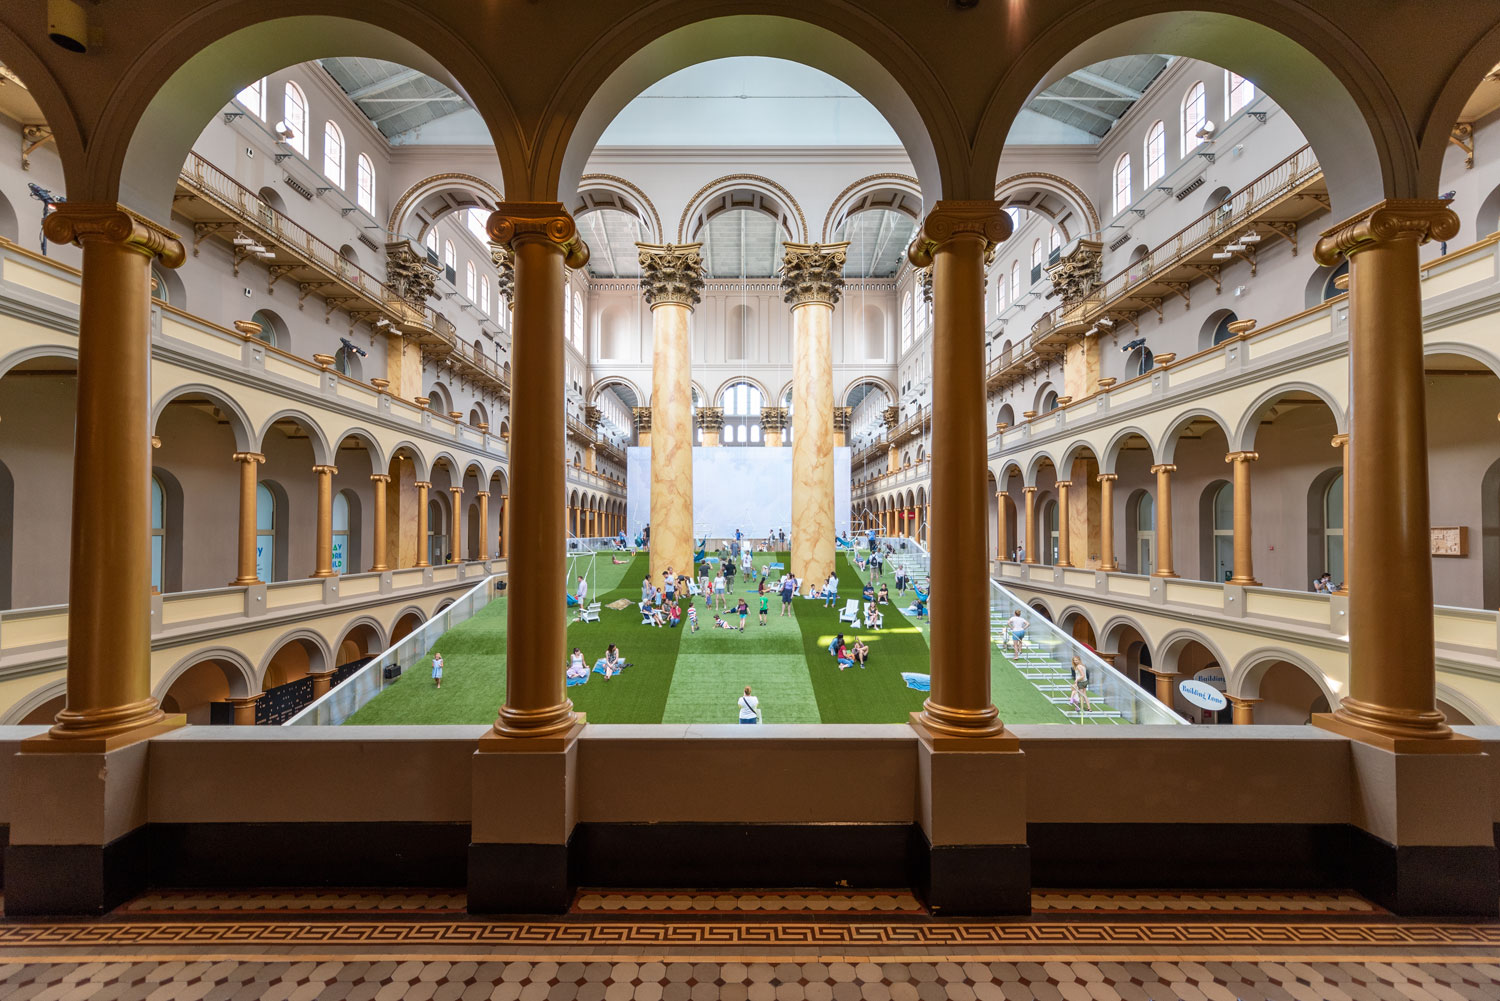 Lawn At The National Building Museum. Photos by Timothy Schenck.